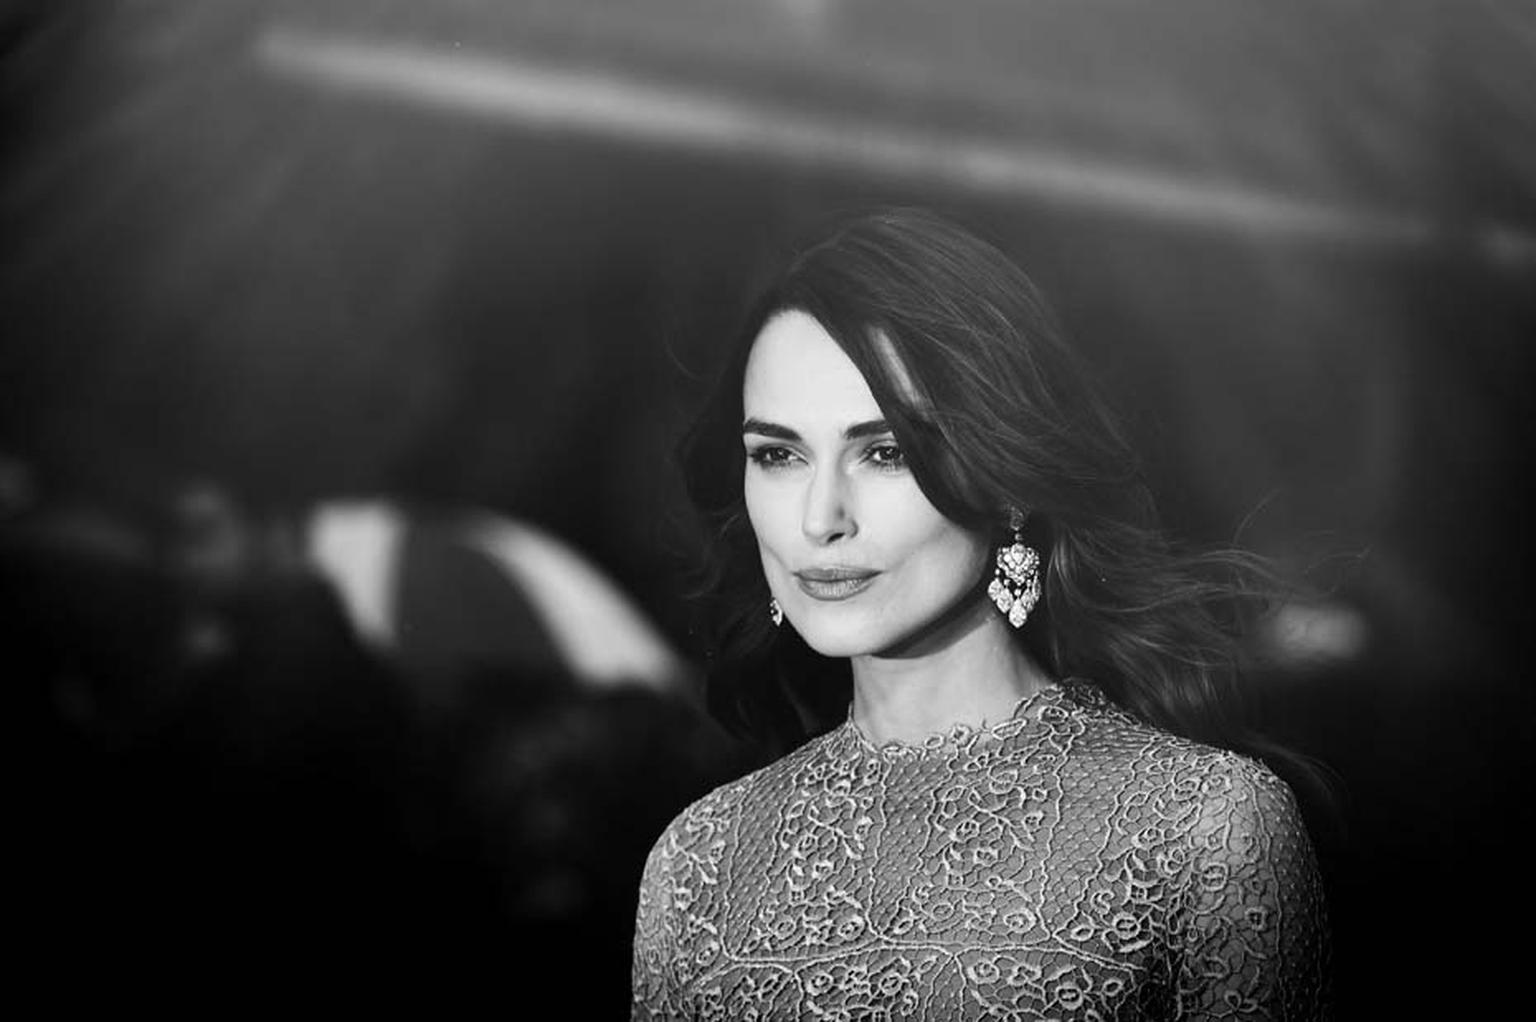 Festival.  It is not the first time that Keira has sparkled in David Morris jewels. Last year she wore several of the London jeweller’s pieces, including the Wildflower pearl necklace, for a feature in Rika magazine.